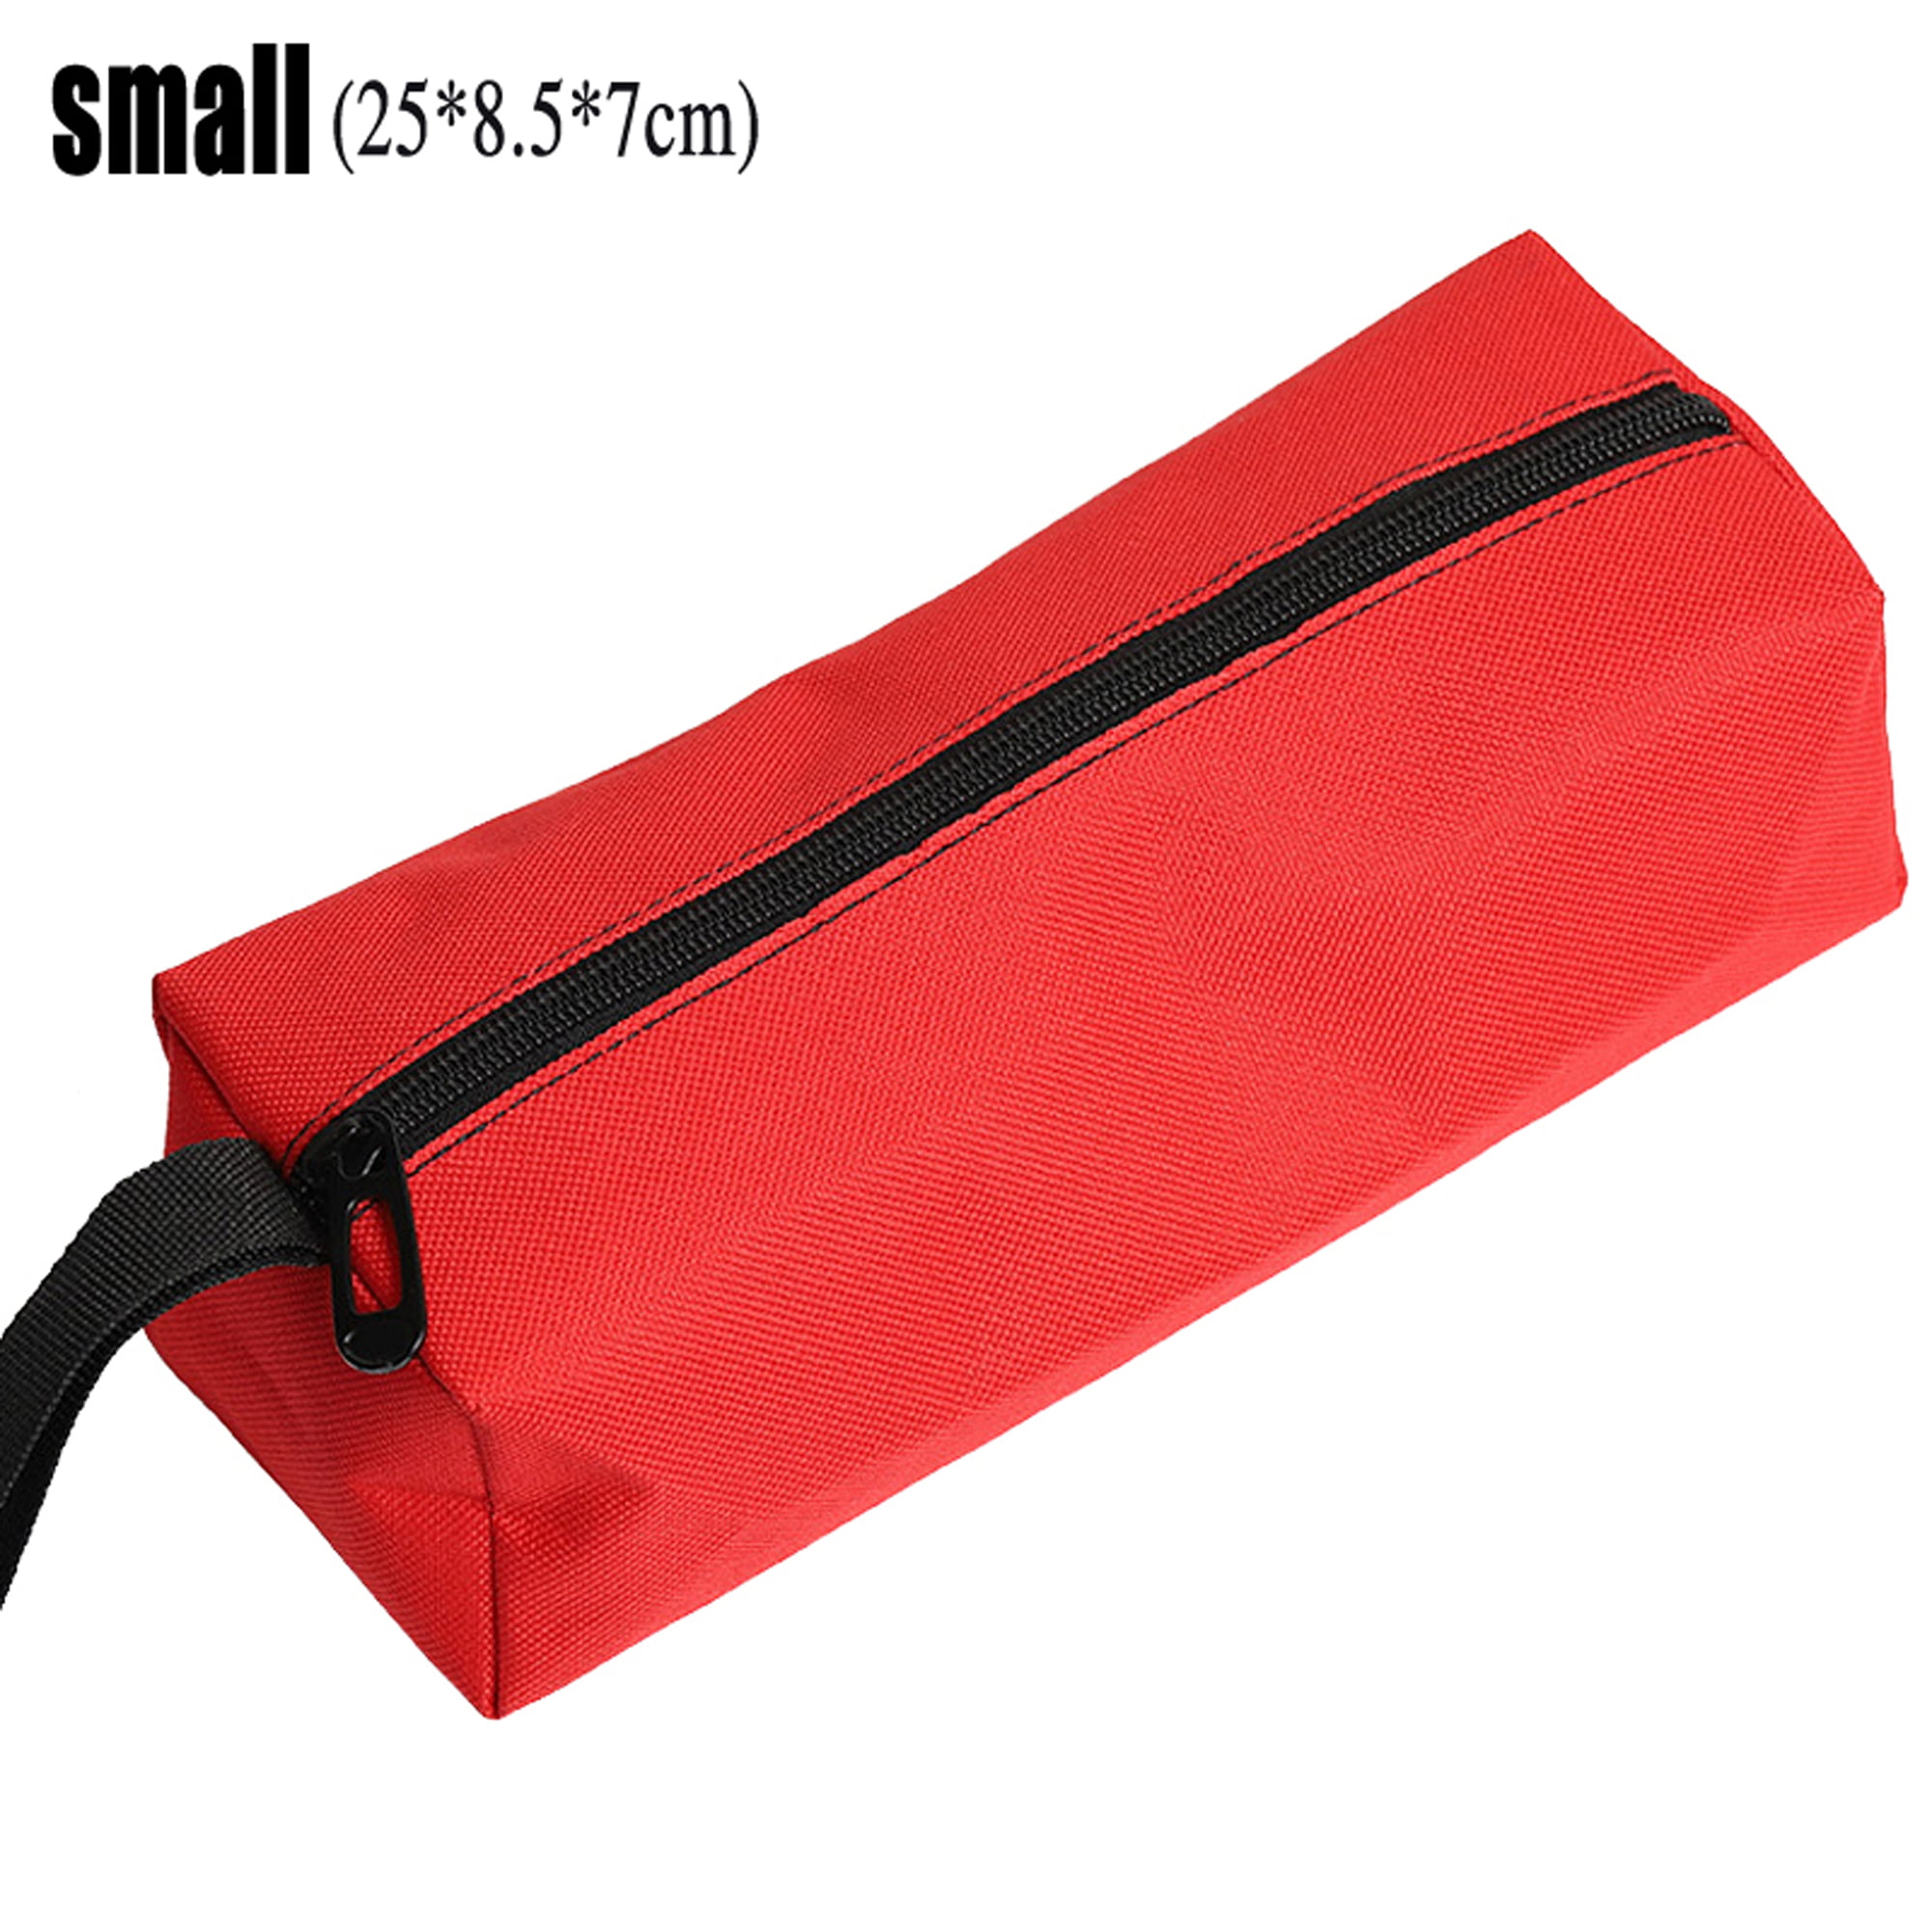 Craftsman Zipper Storage Tool Bag Pouch Organizer Small Parts Hand Tool Plumber 